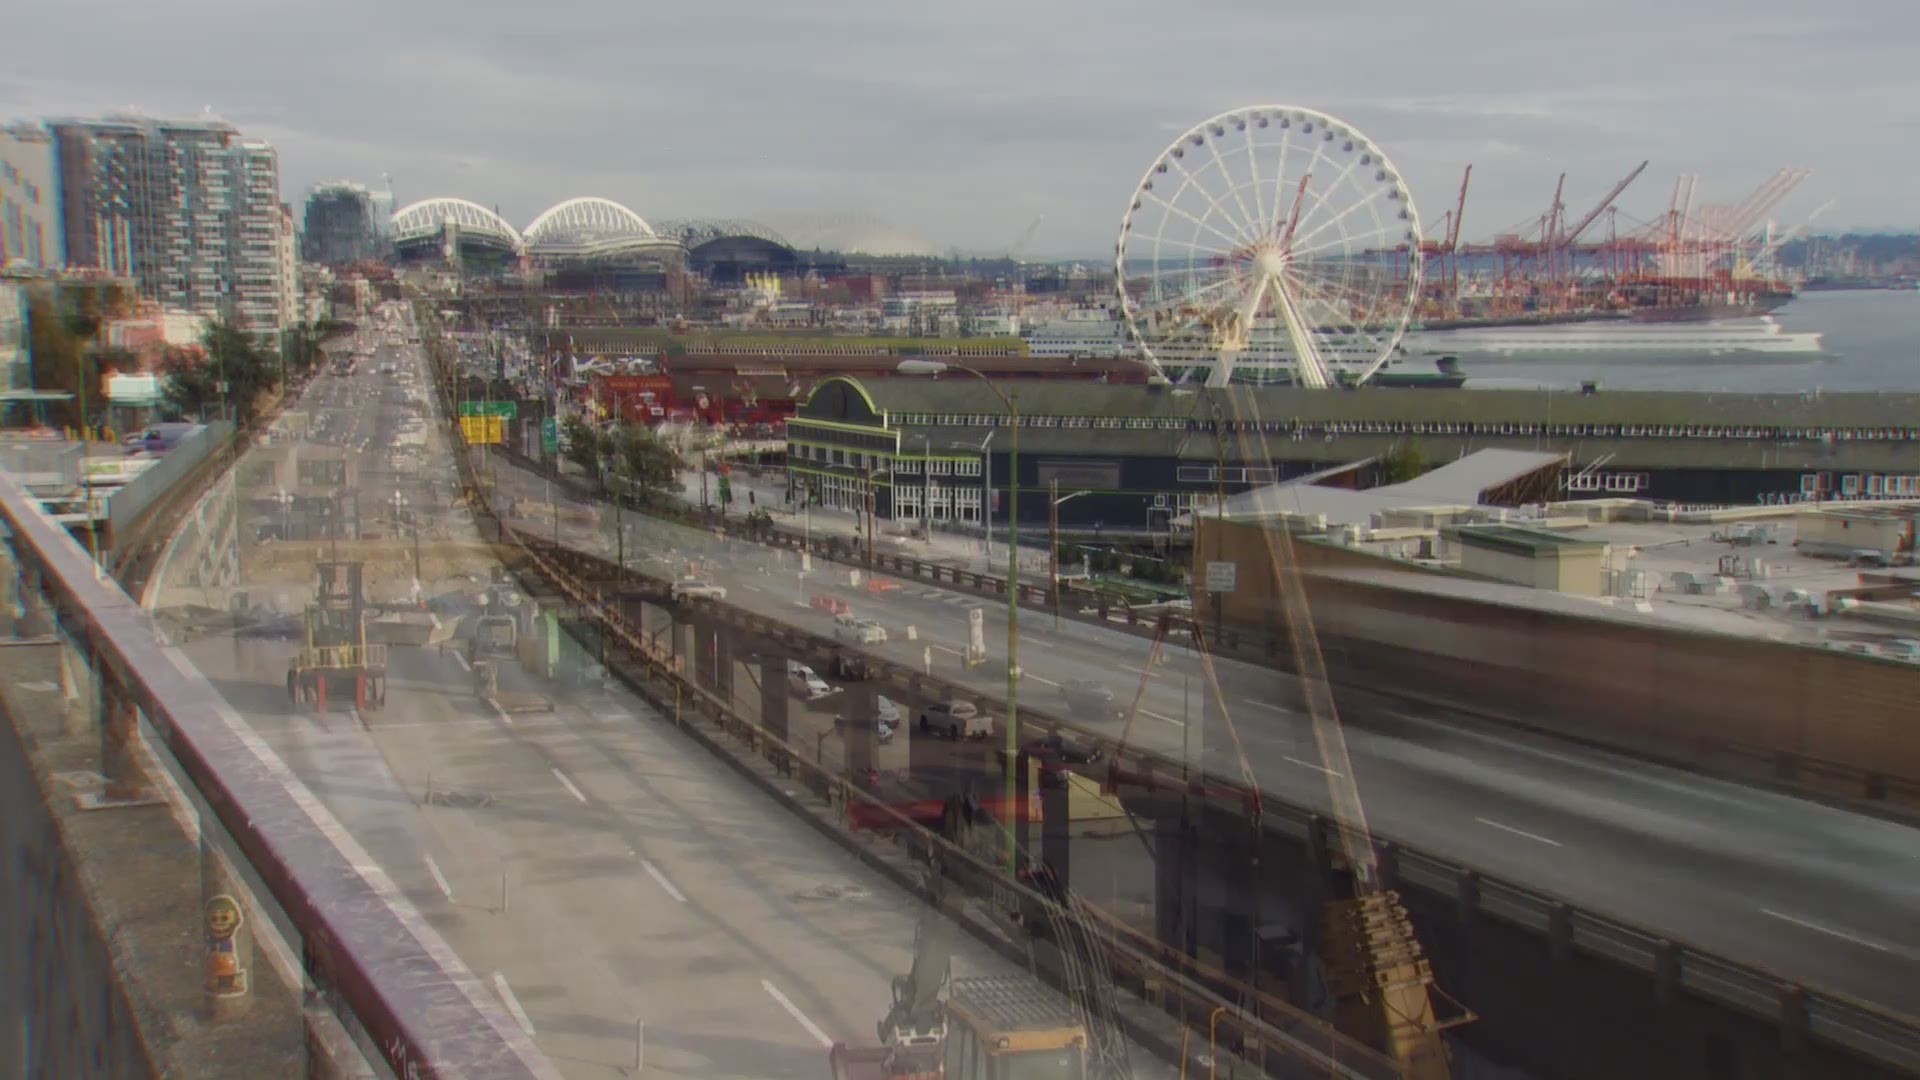 Timelapse gives you a look at the before and after of the demolition of the Alaskan Way Viaduct in Seattle.